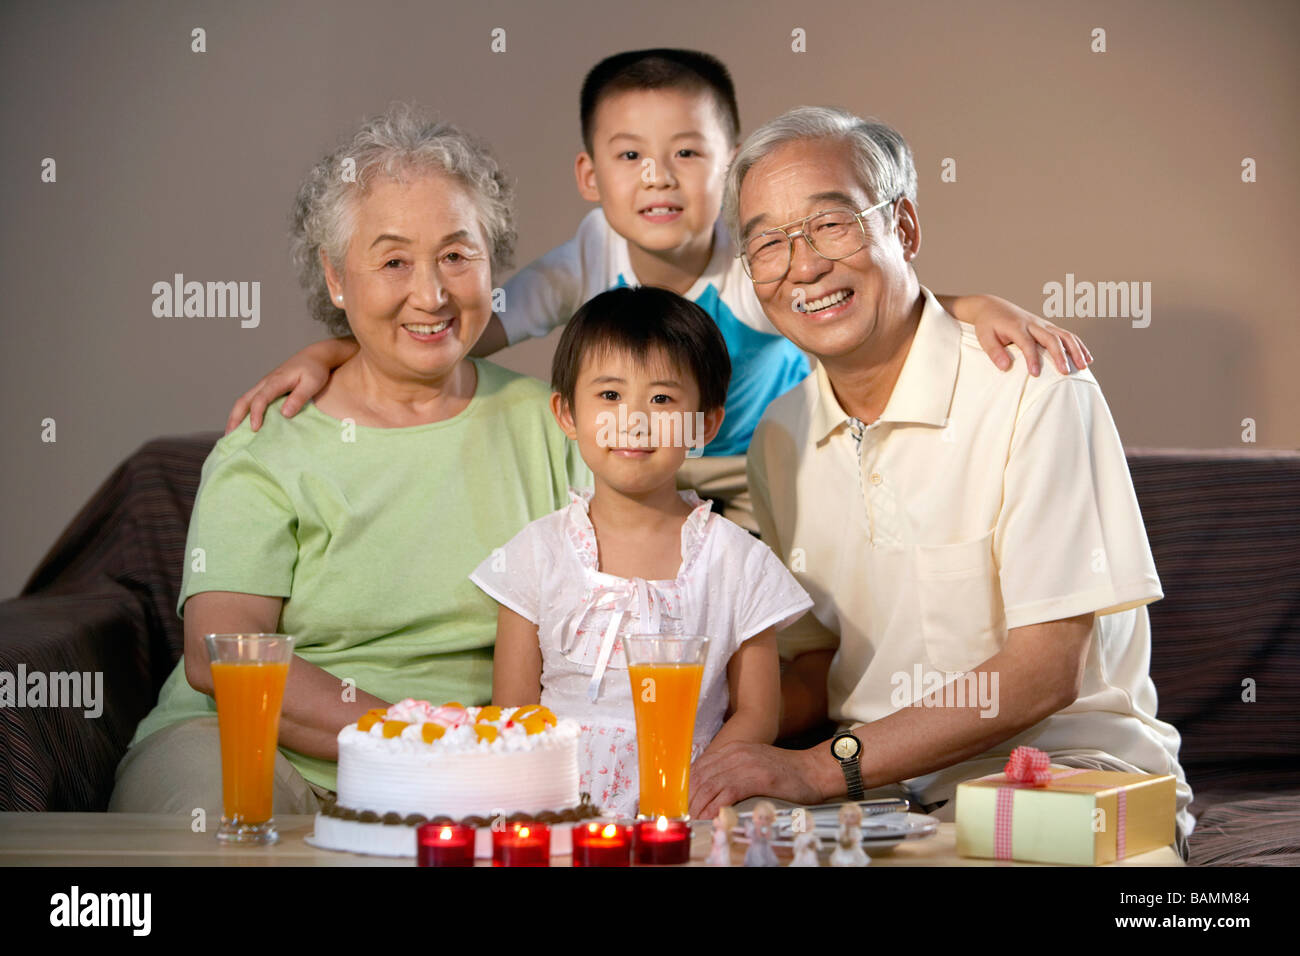 Grandparents And The Grandchildren Smile For The Camera On A Birthday Stock Photo